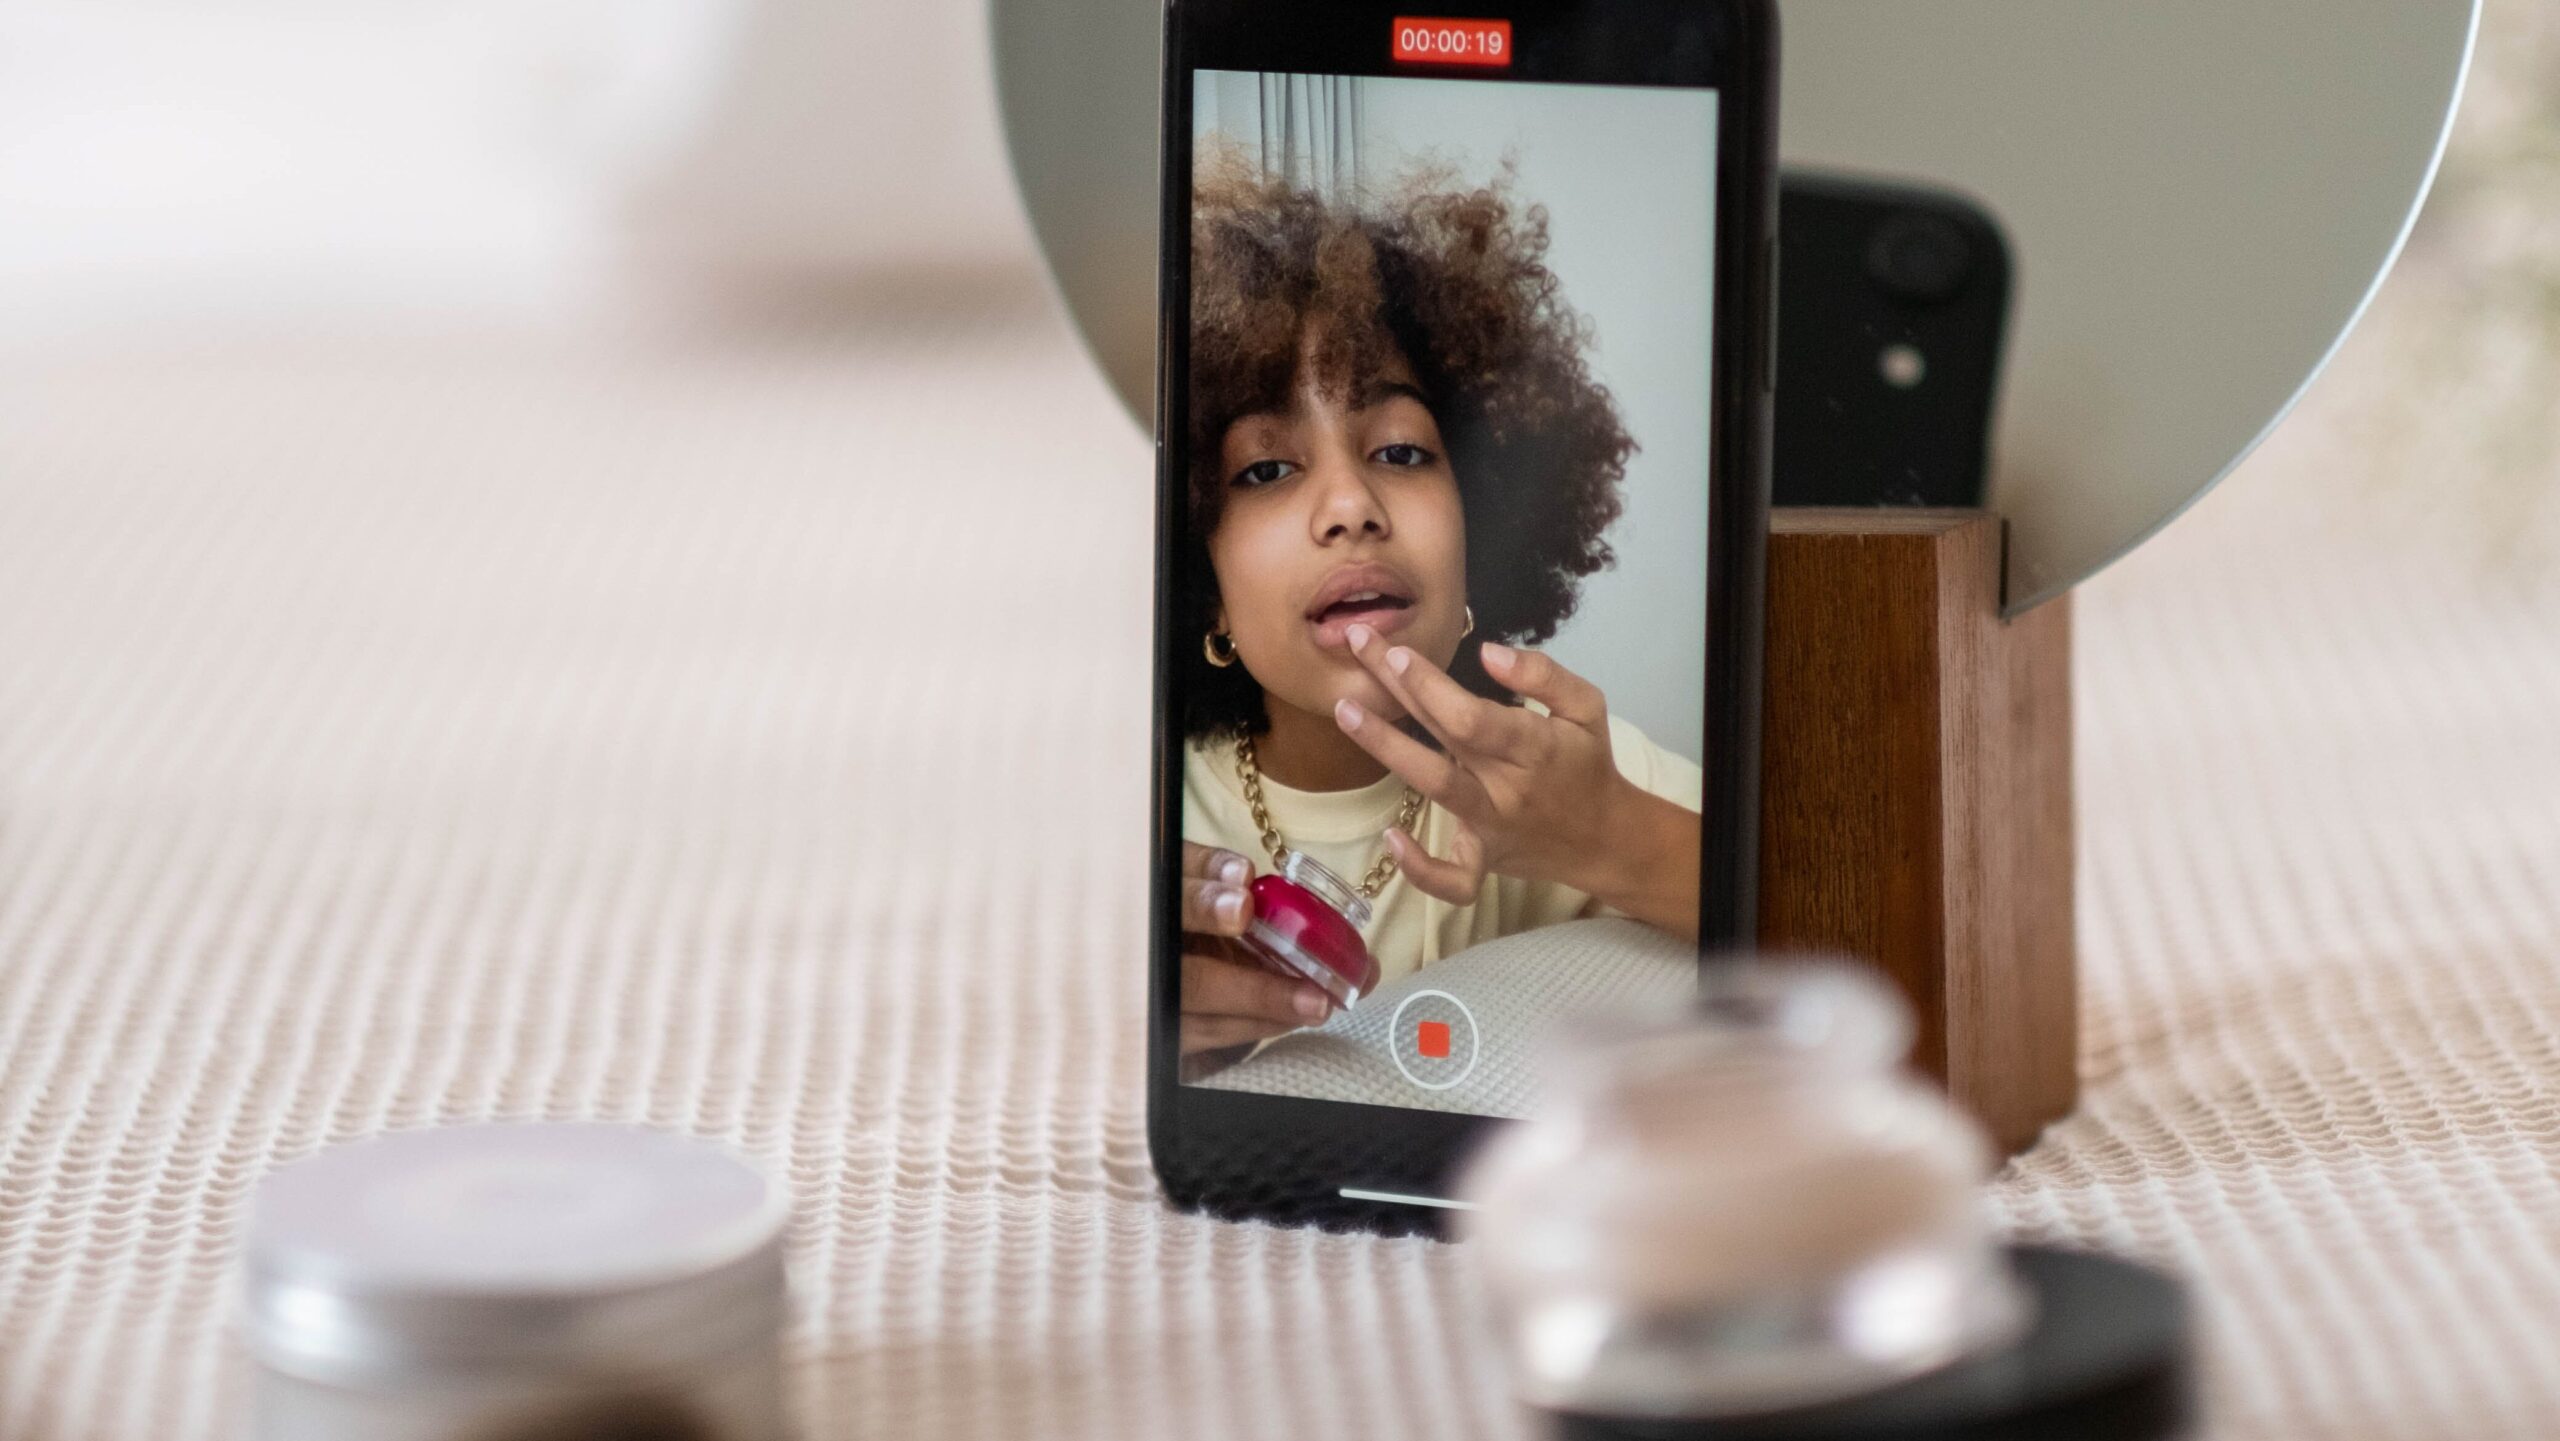 Peering at a phone propped up against a mirror as a black woman with kinky hair puts on lipgloss while recording herself on the phone.